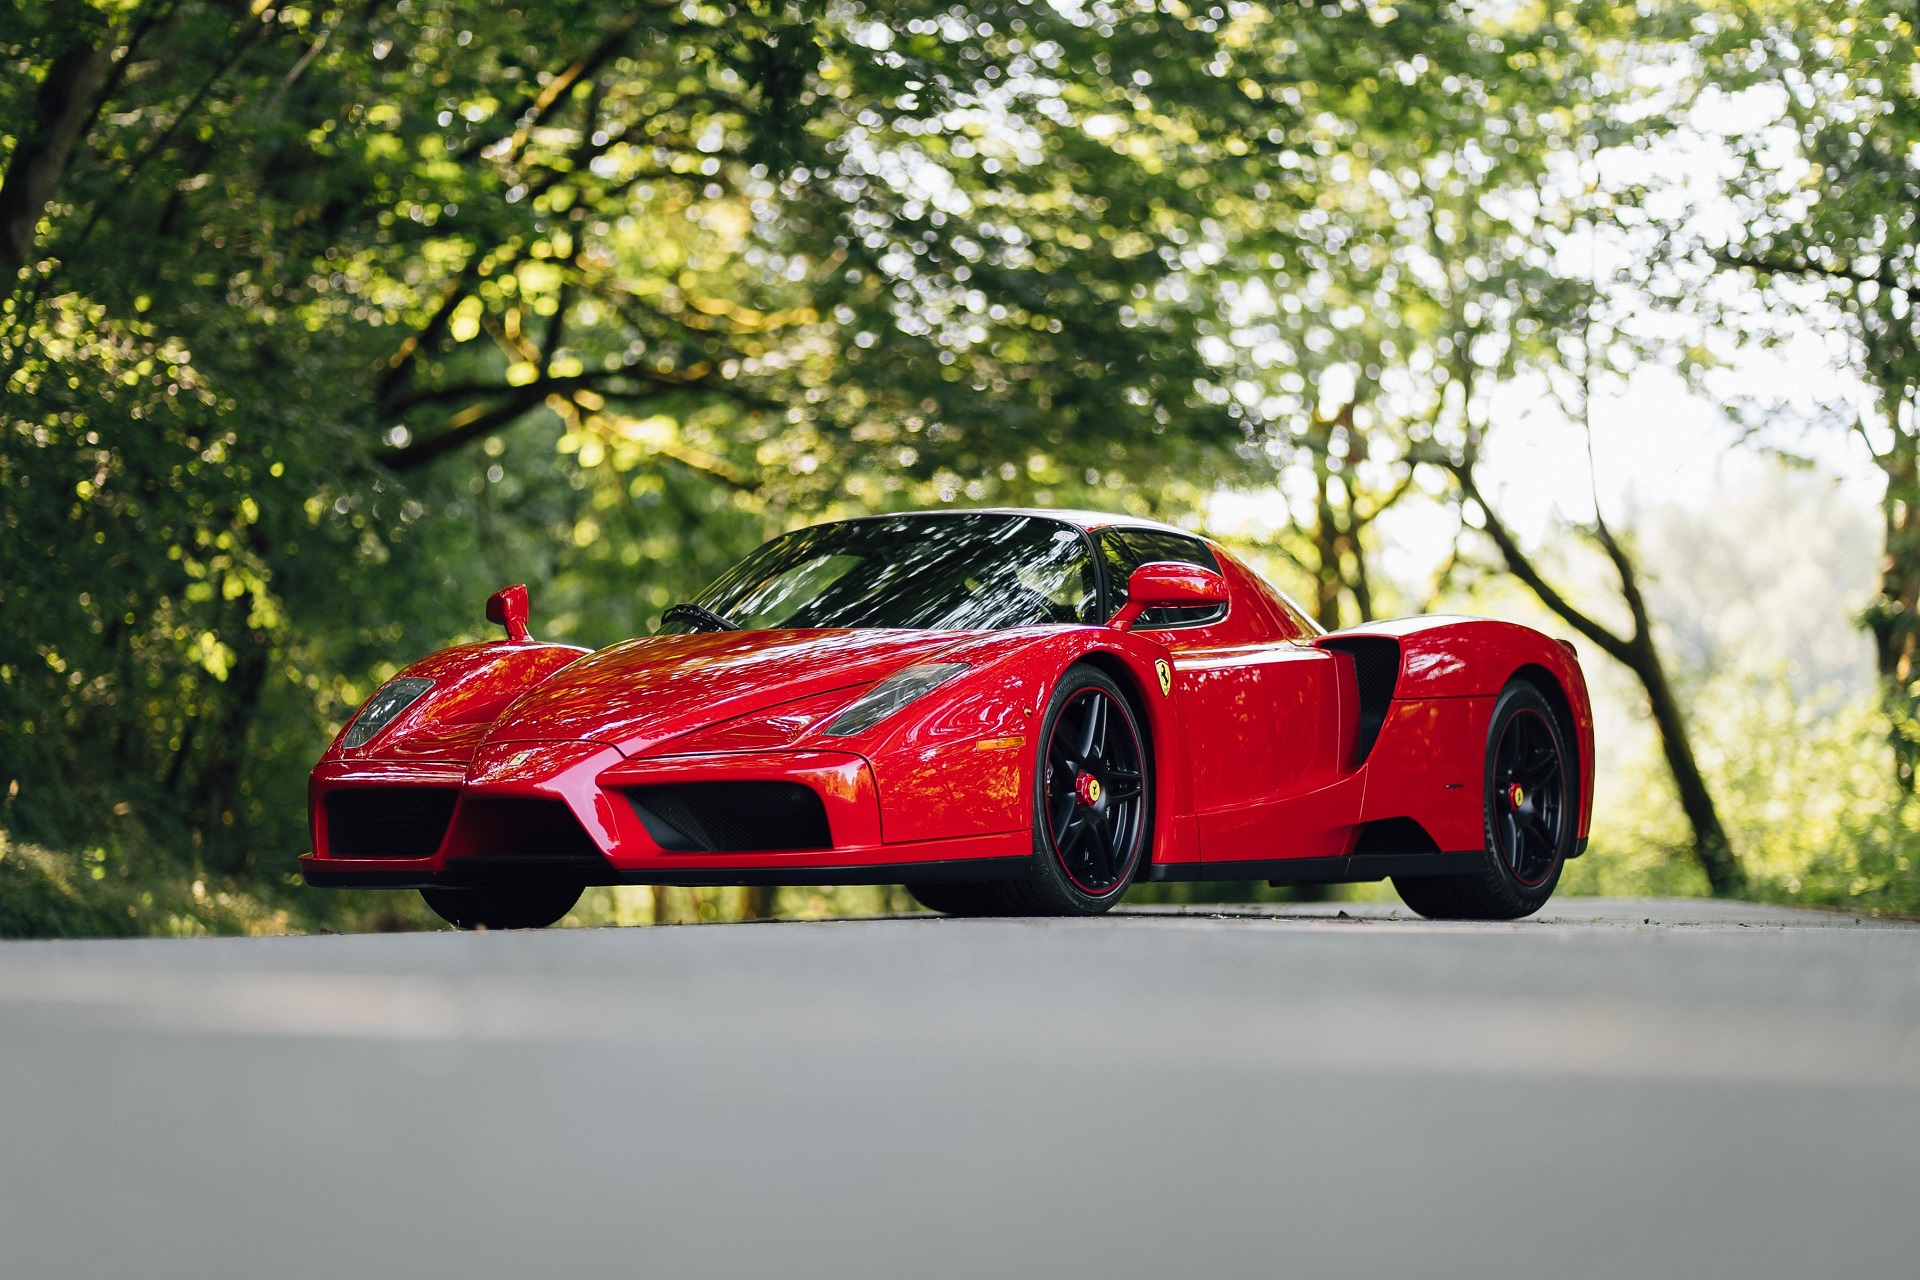 front angled view of the red 2003 Ferrari Enzo.